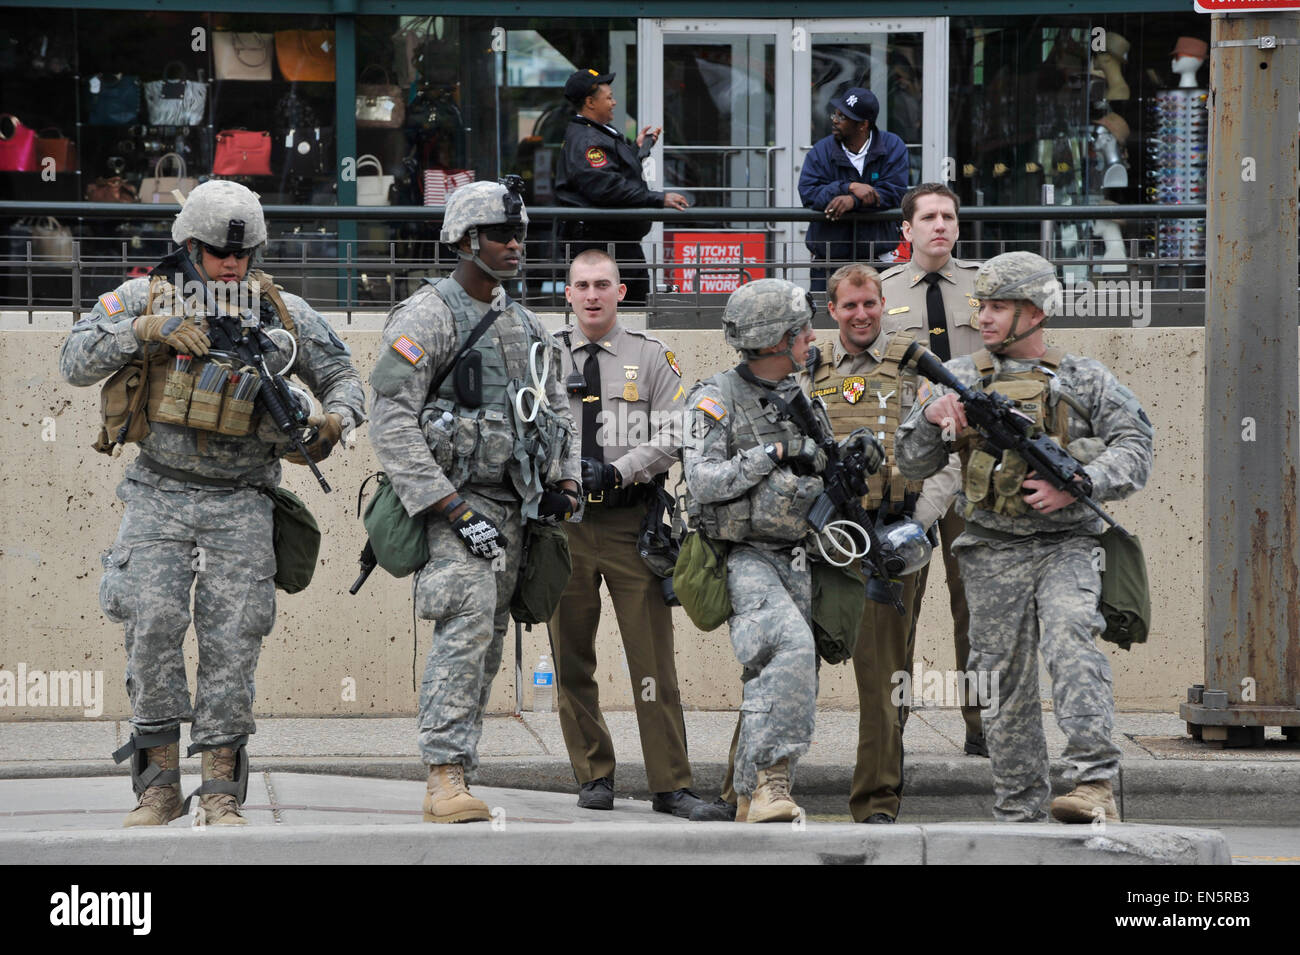 Baltimore, Maryland, USA. 28th Apr, 2015. Members of the National Guard and Maryland state troopers guard Inner Habor, a popular Baltimore tourist area, following rioting. During a night of outrage sparked by the death of 25-year-old Freddie Gray in police custody, the city saw more than a dozen building fires, nearly 200 arrests, and 19 injured police officers. Credit:  Jay Mallin/ZUMA Wire/Alamy Live News Stock Photo